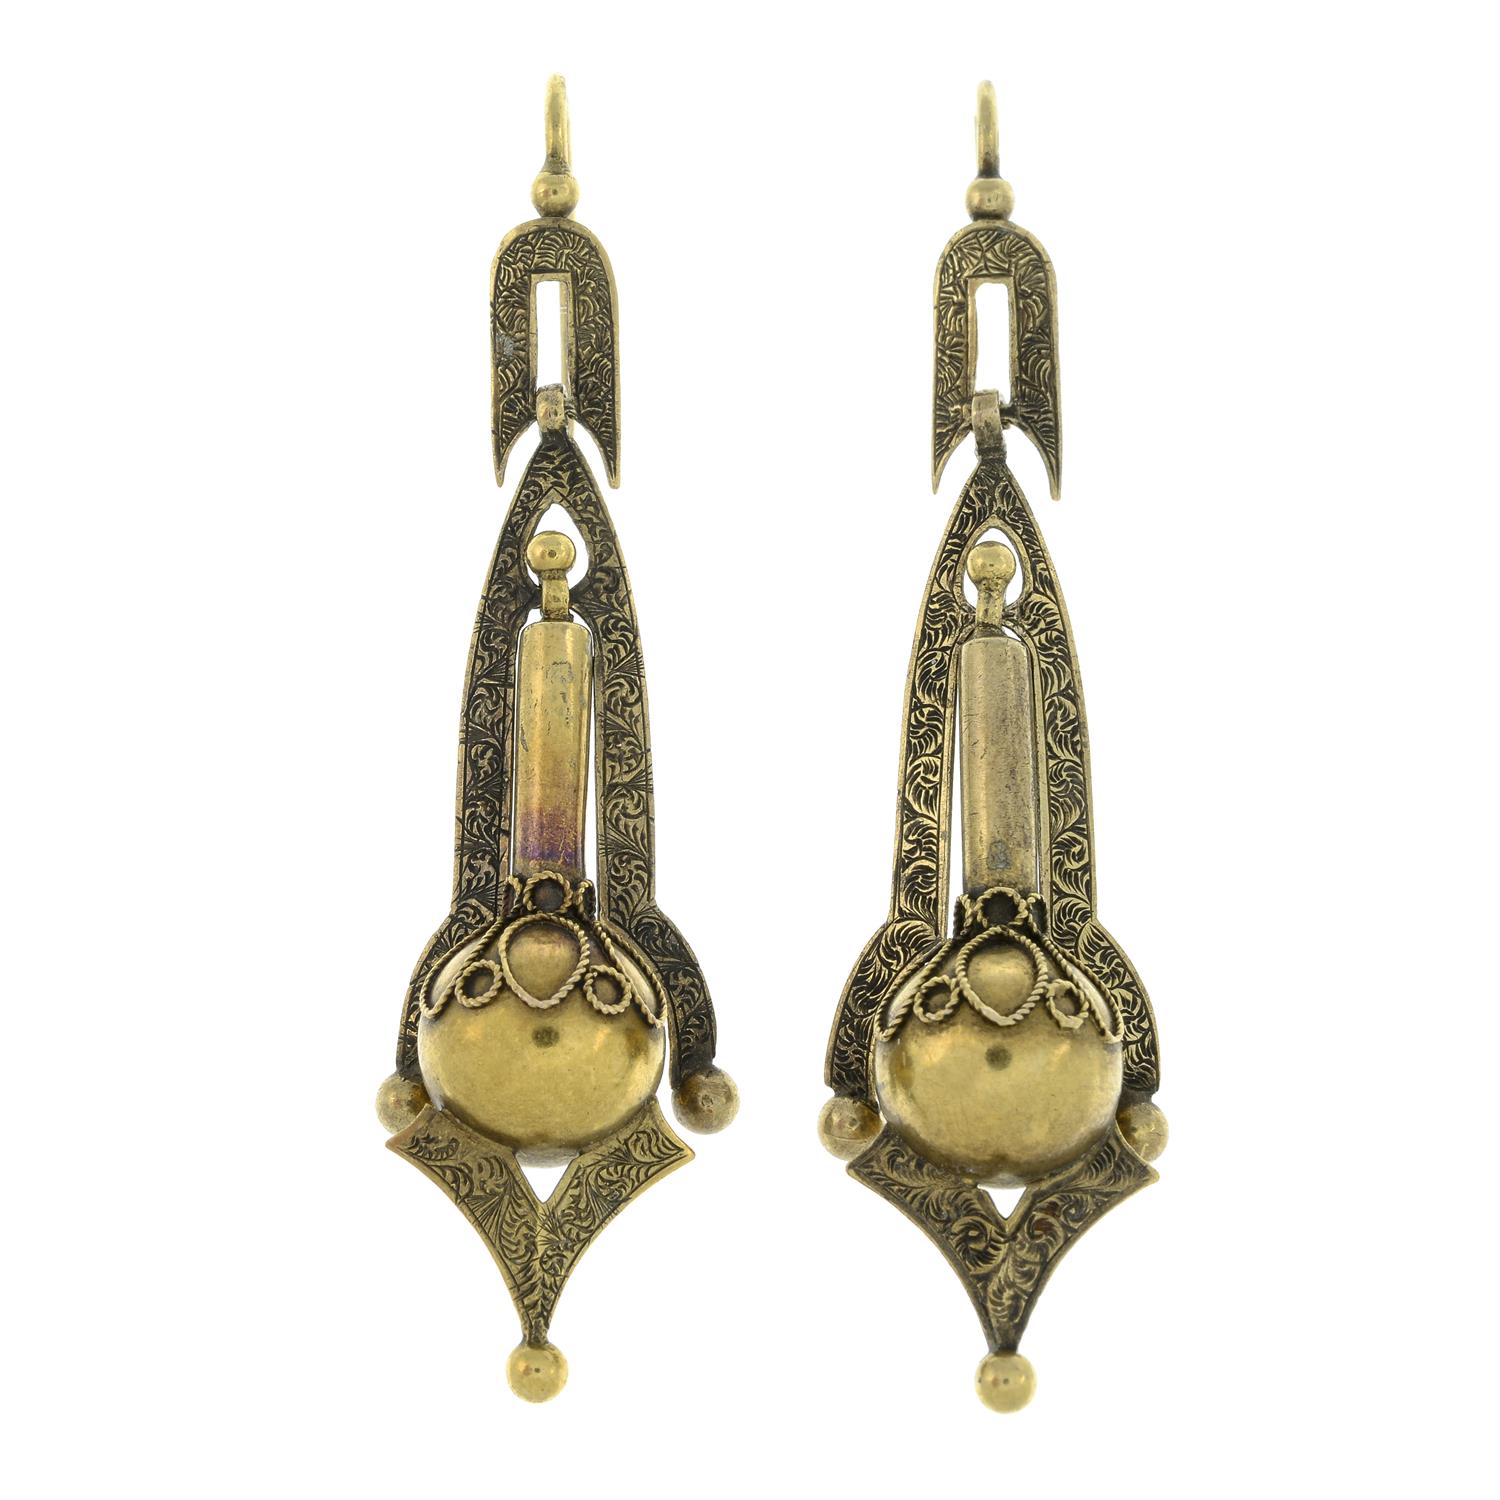 Late 19th century Etruscan Revival gold earrings - Image 2 of 4